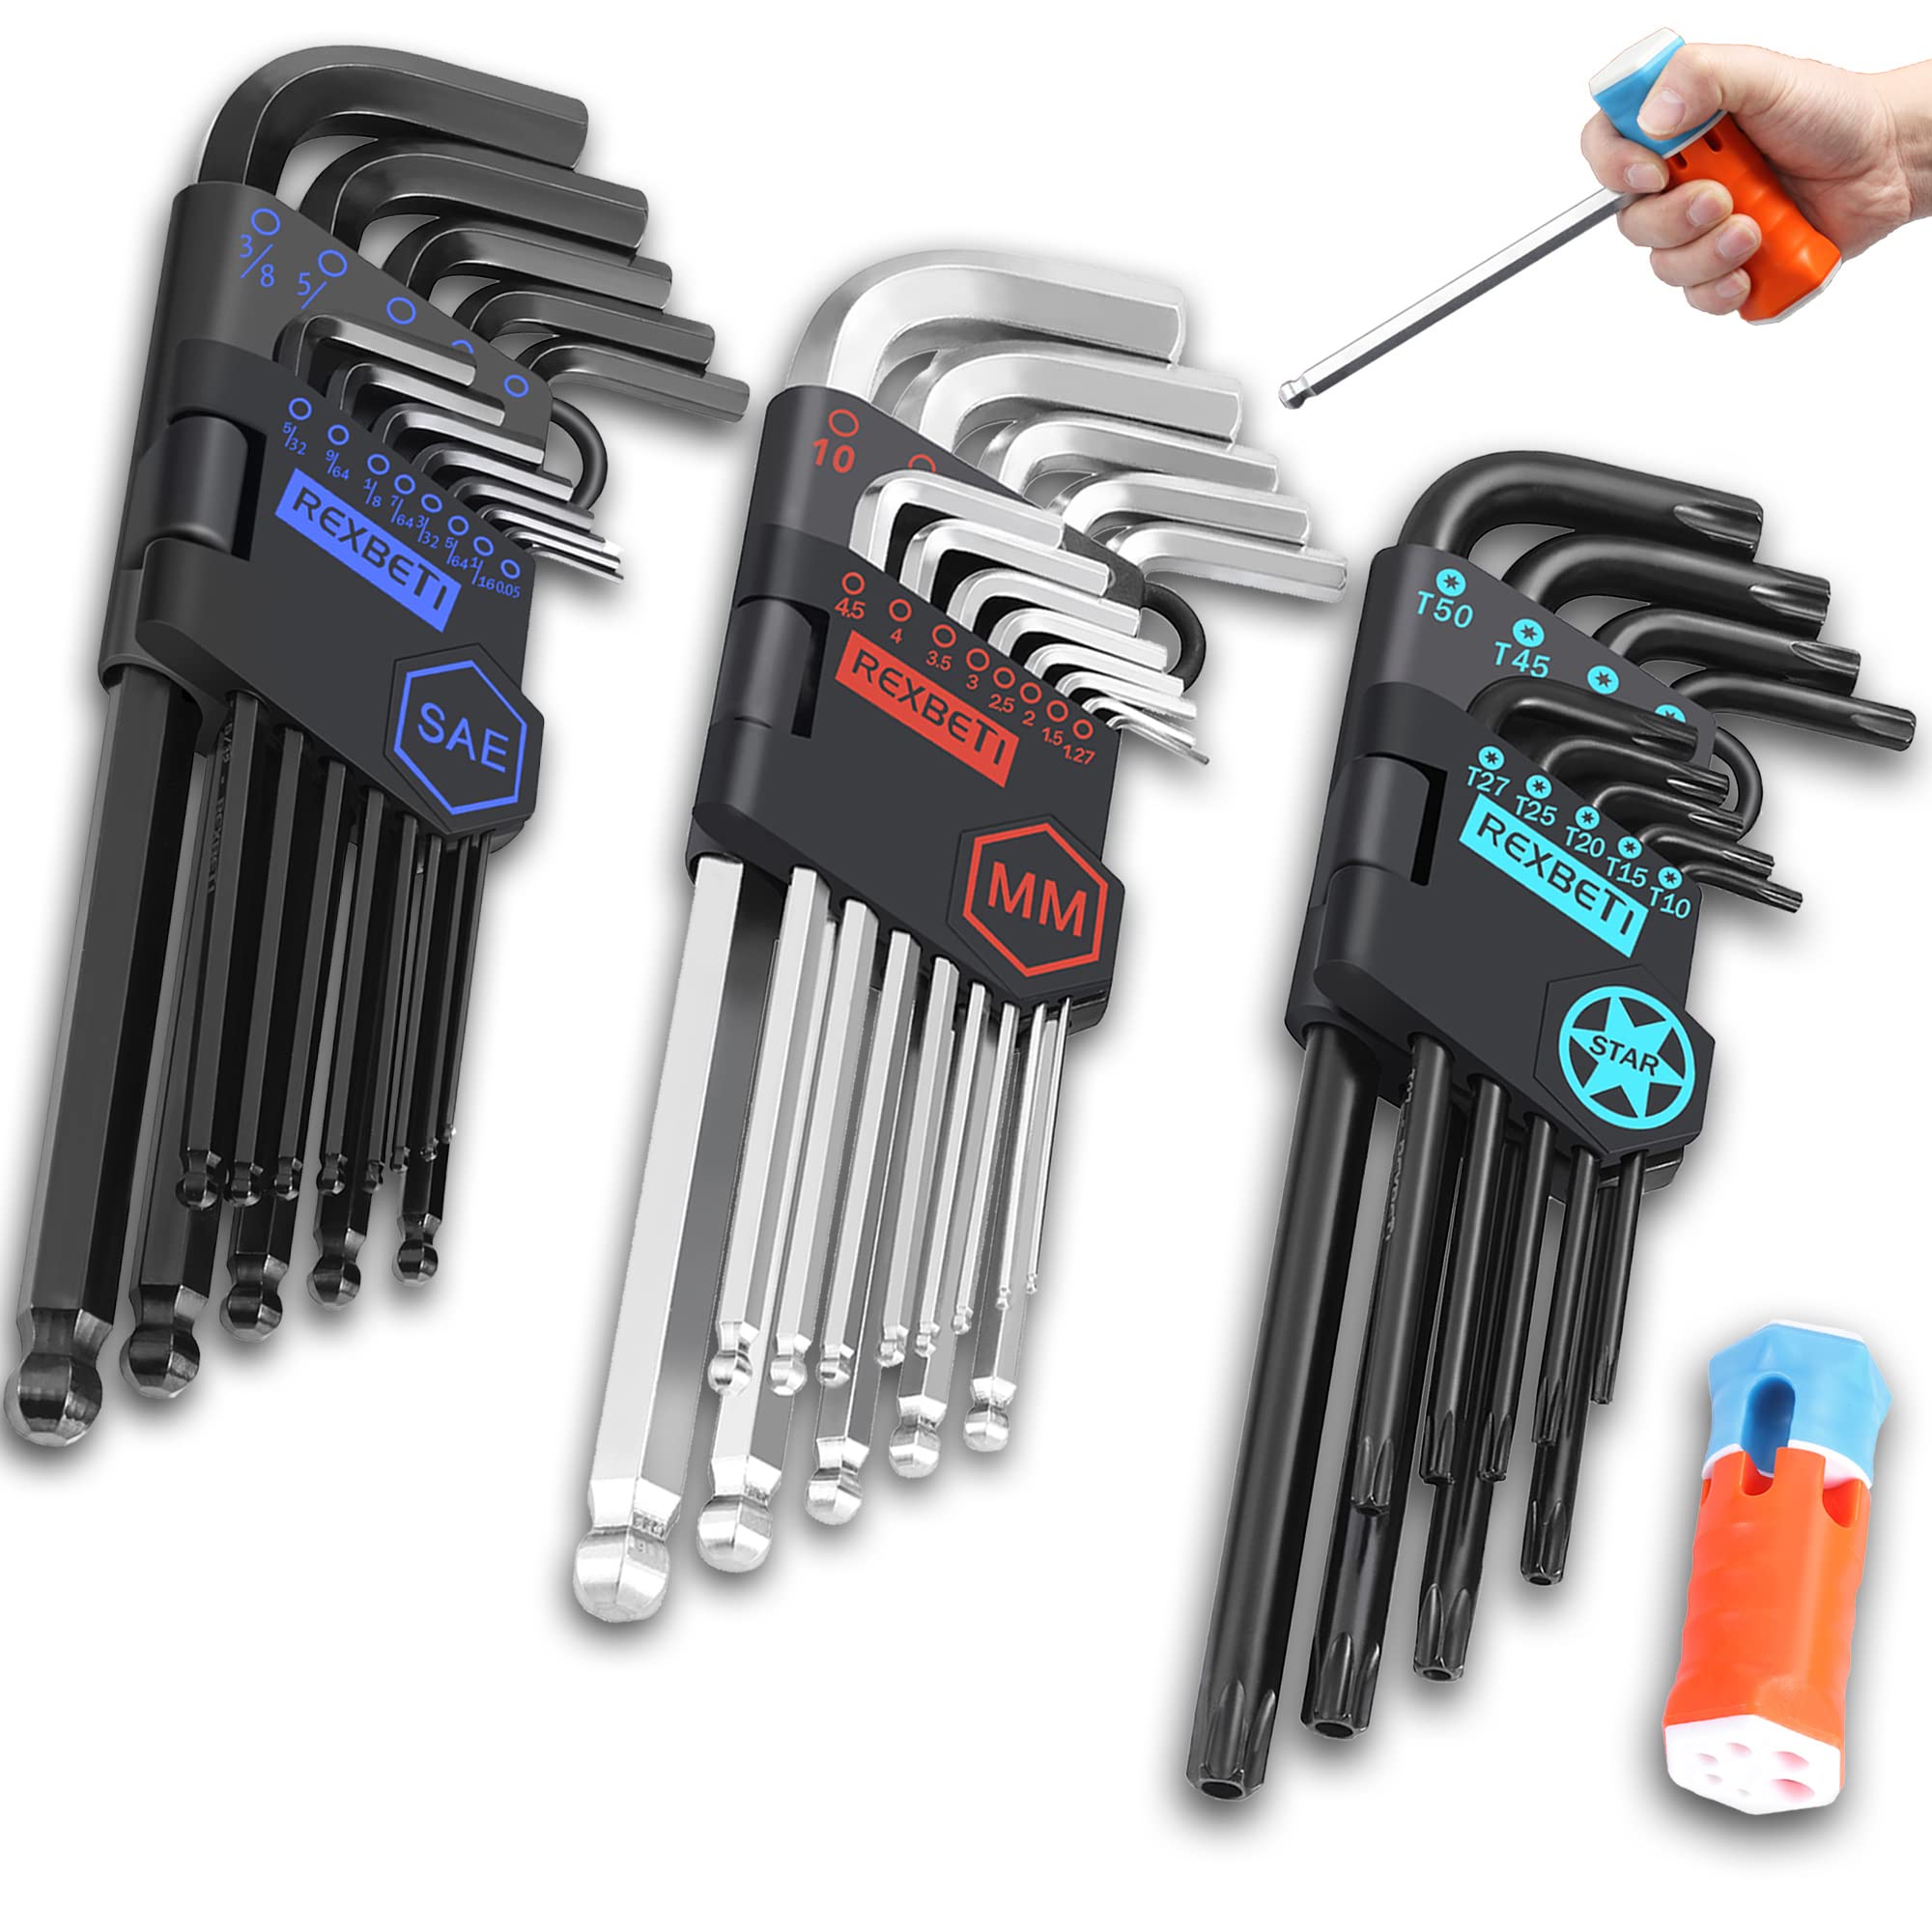 Need Durable Allen Wrenches for Tiny Spaces. Try These Sturdy Swiss Hex Keys